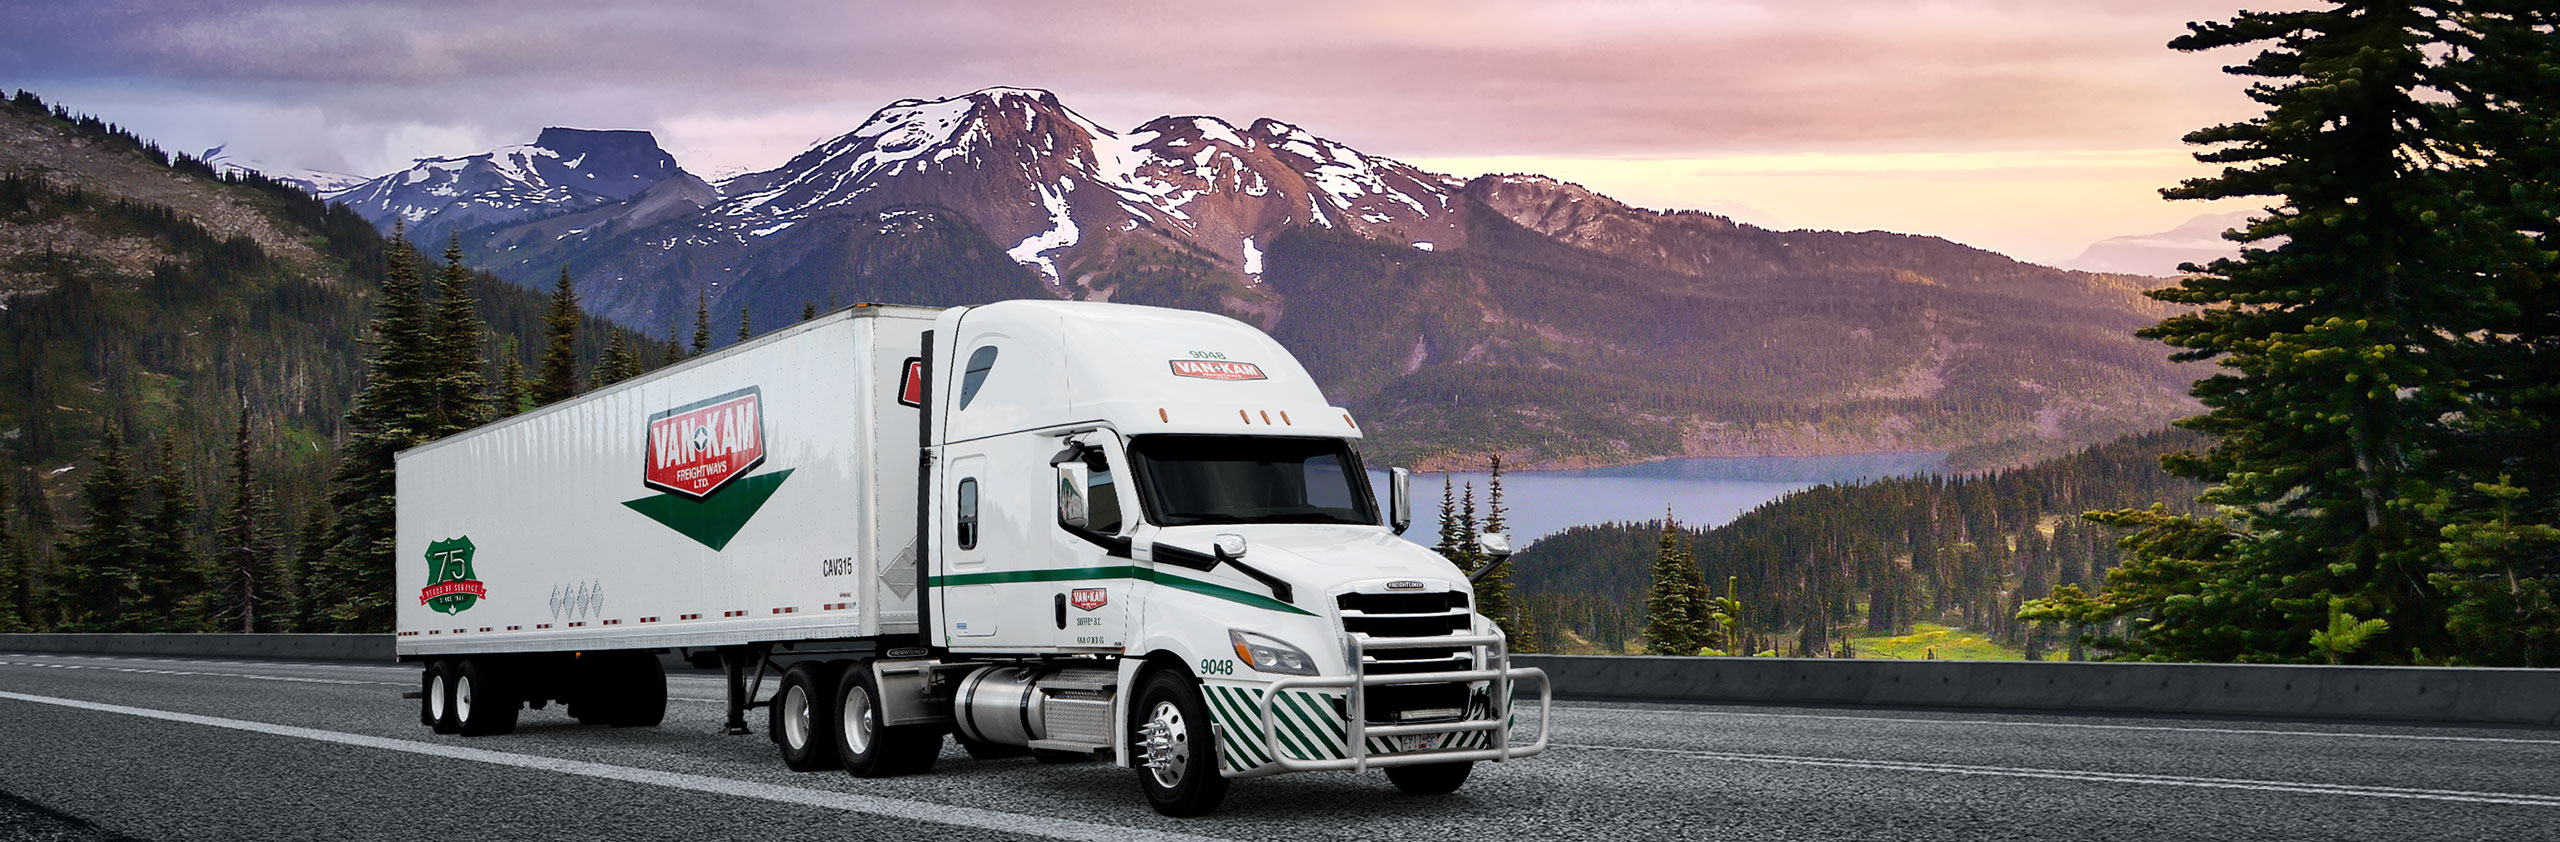 Van Kam highway truck and 75th anniversary trailer driving in front of BC mountain landscape